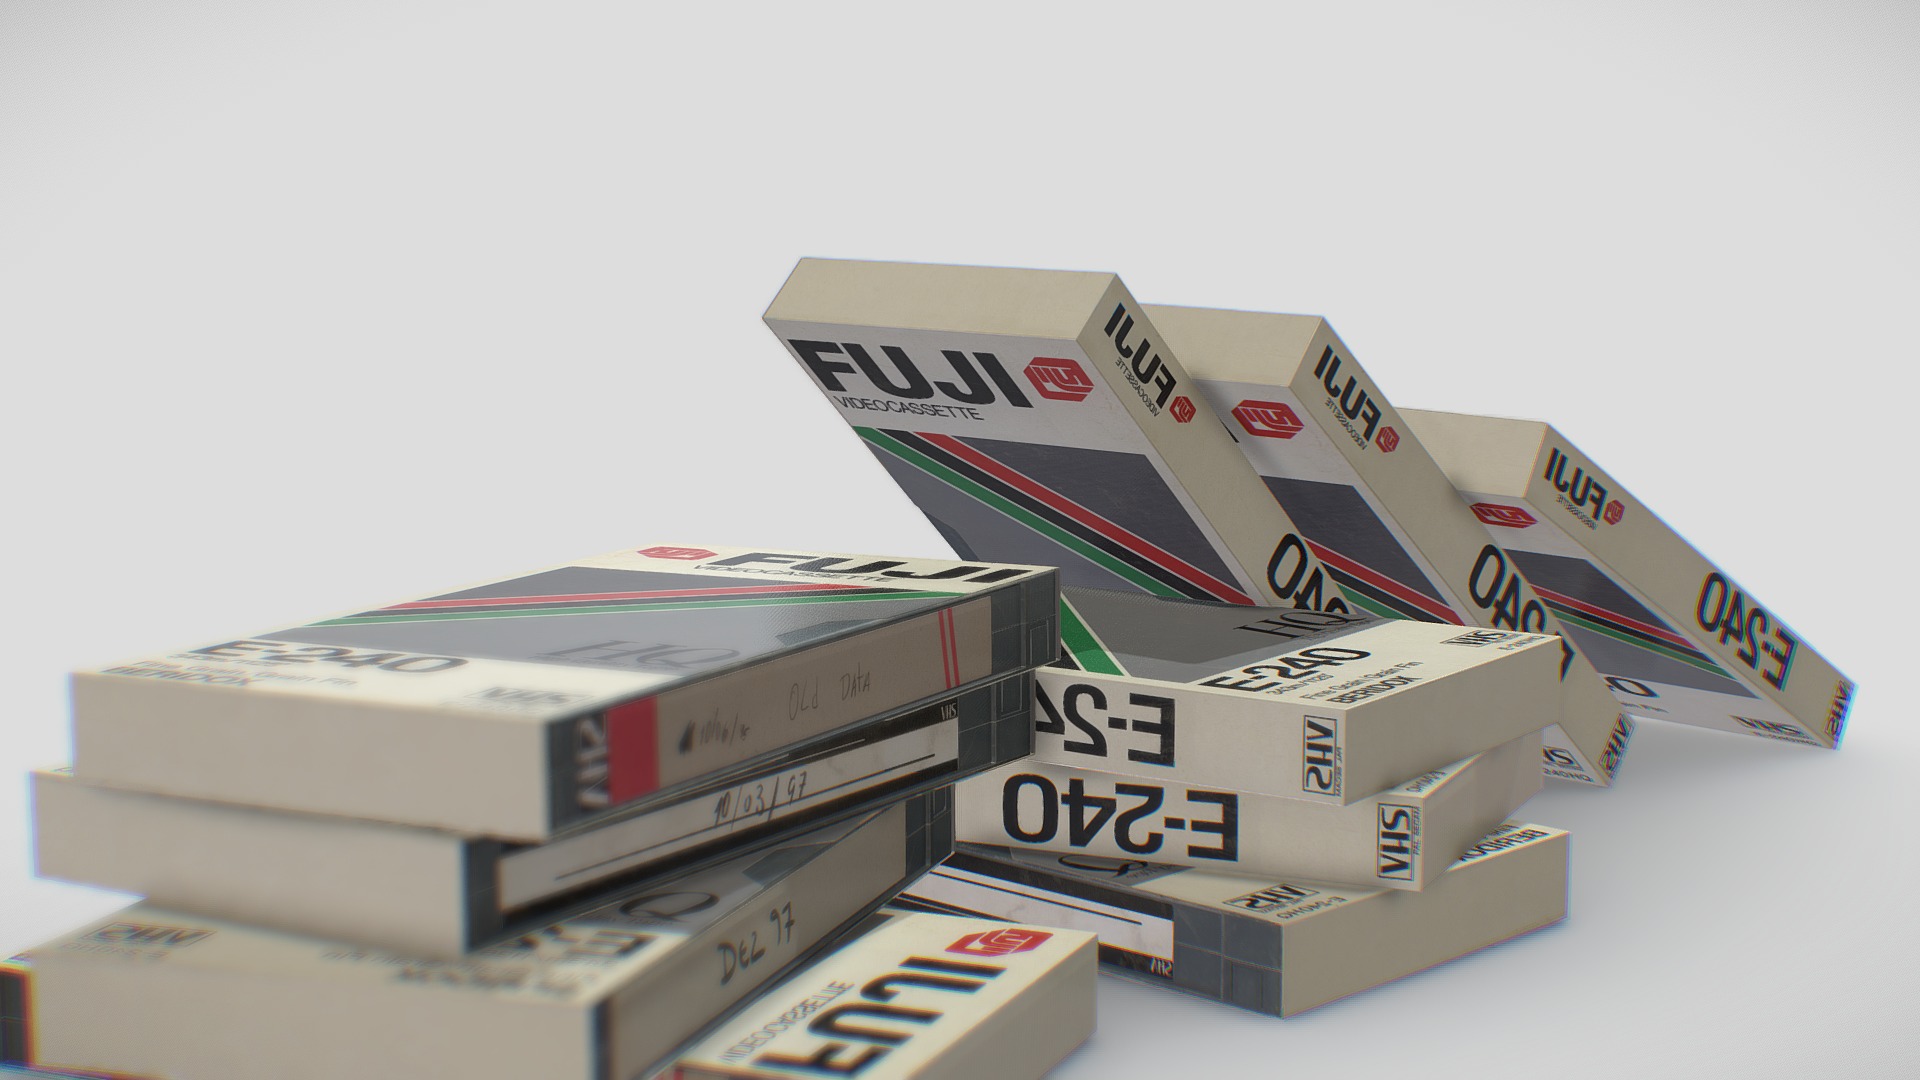 3D model Vhs Tape - This is a 3D model of the Vhs Tape. The 3D model is about a stack of boxes.